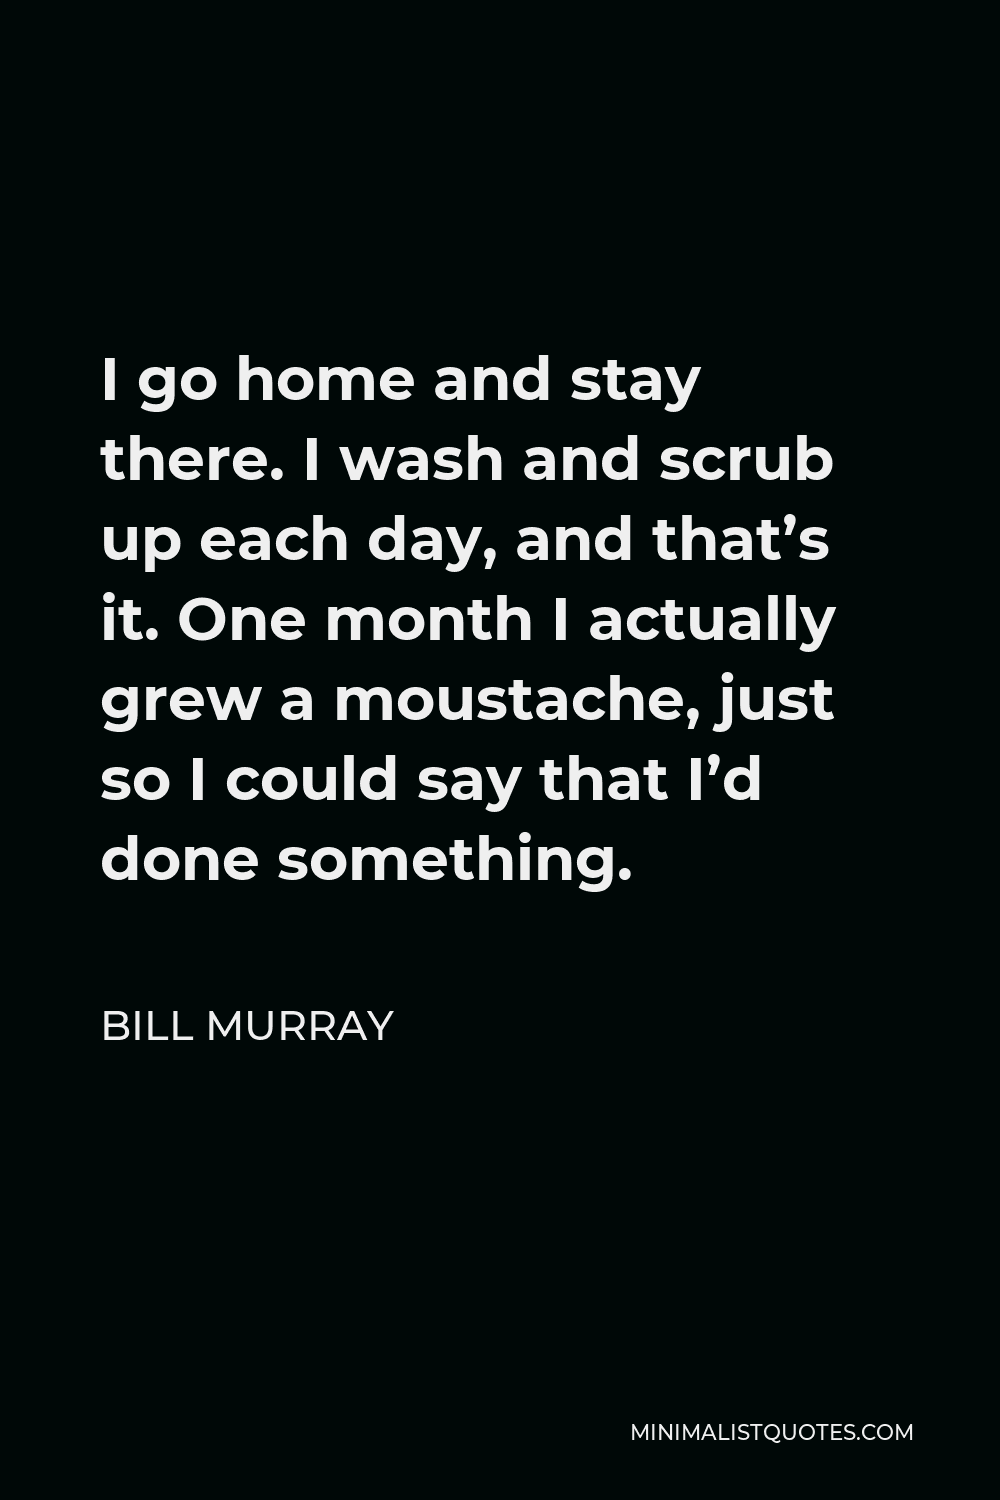 Bill Murray Quote - I go home and stay there. I wash and scrub up each day, and that’s it. One month I actually grew a moustache, just so I could say that I’d done something.